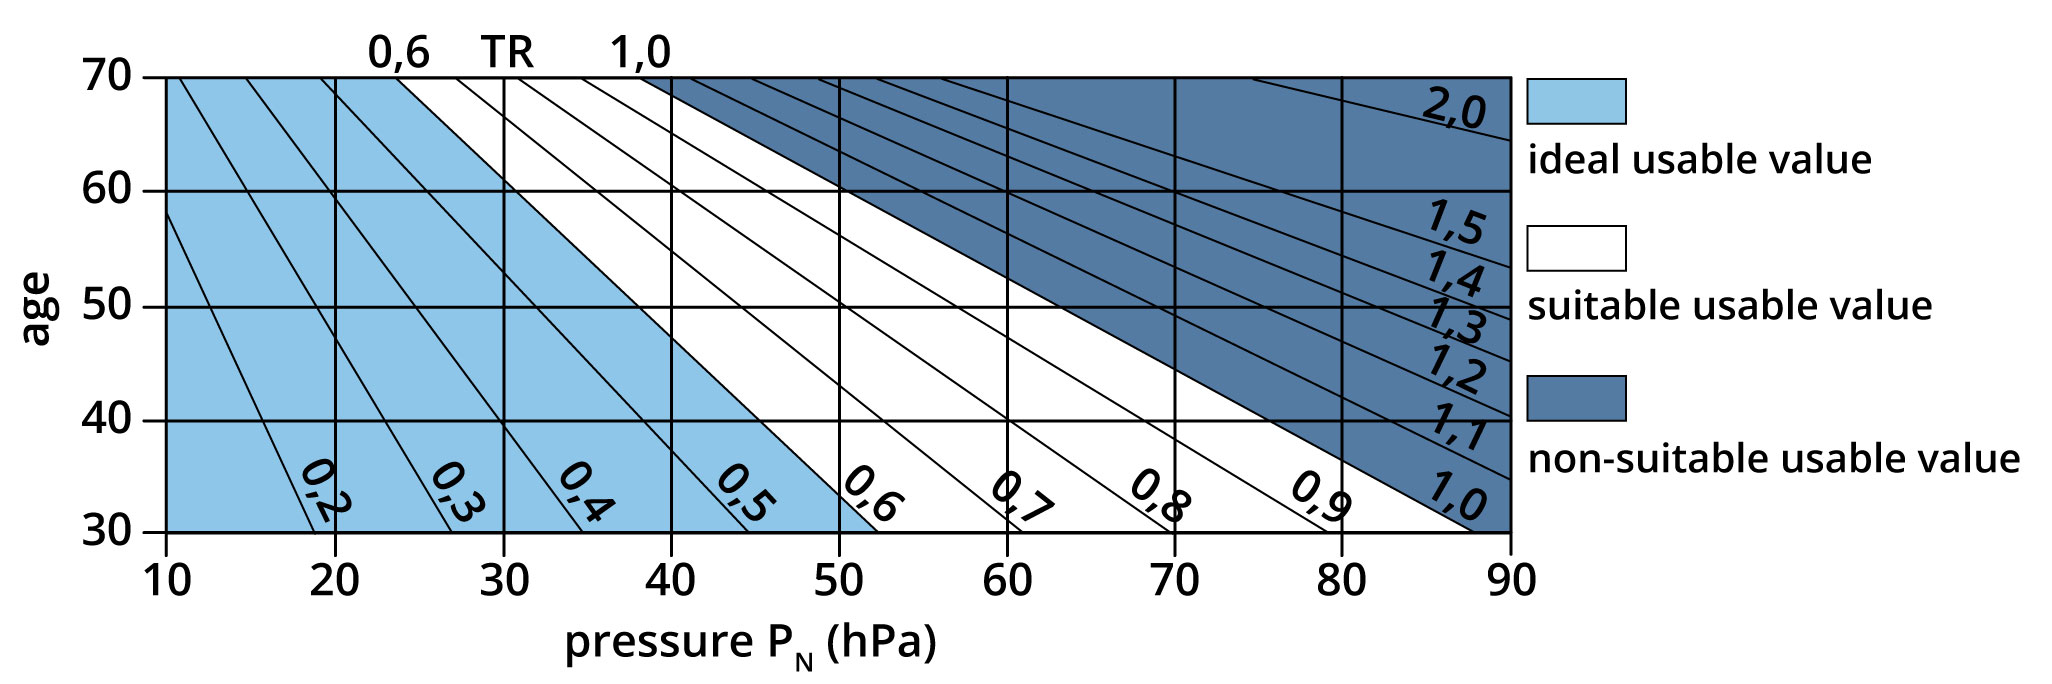 Ideal pressure relation values according to Fischbach (inspired by Rutrle, 2001).